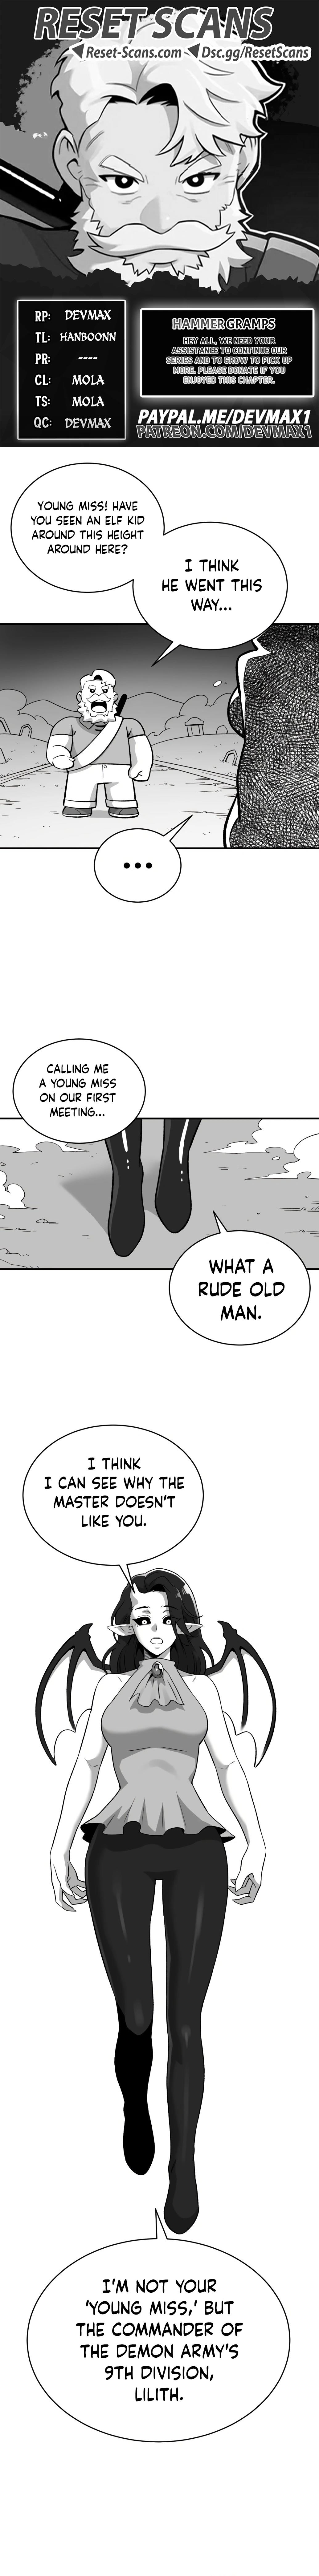 Hammer Gramps - Page 1